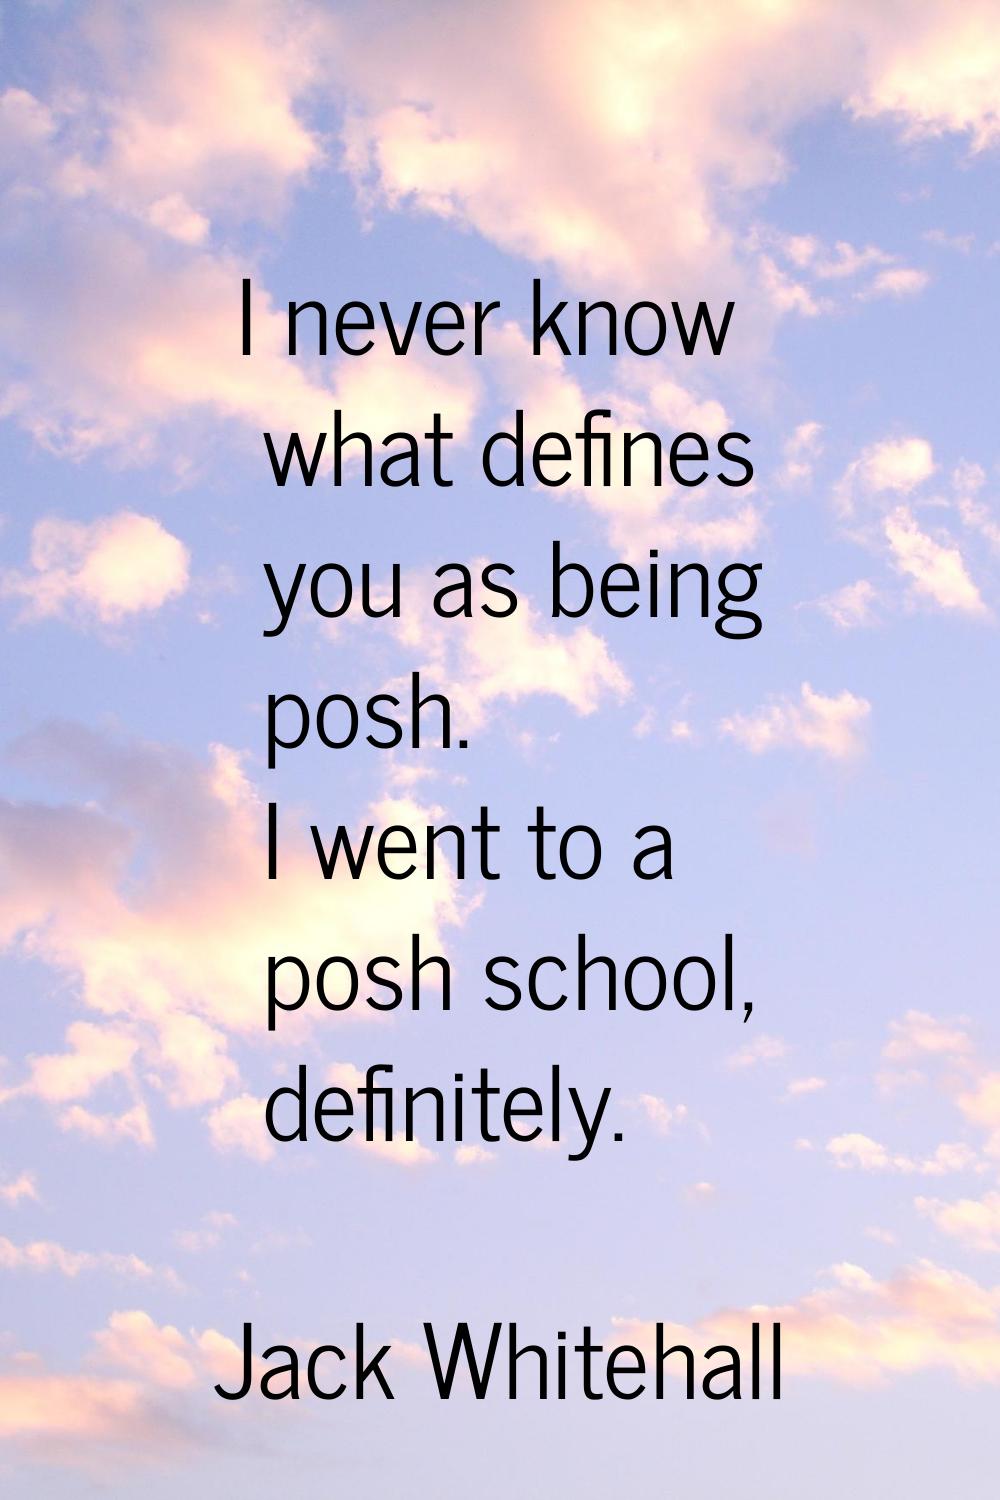 I never know what defines you as being posh. I went to a posh school, definitely.